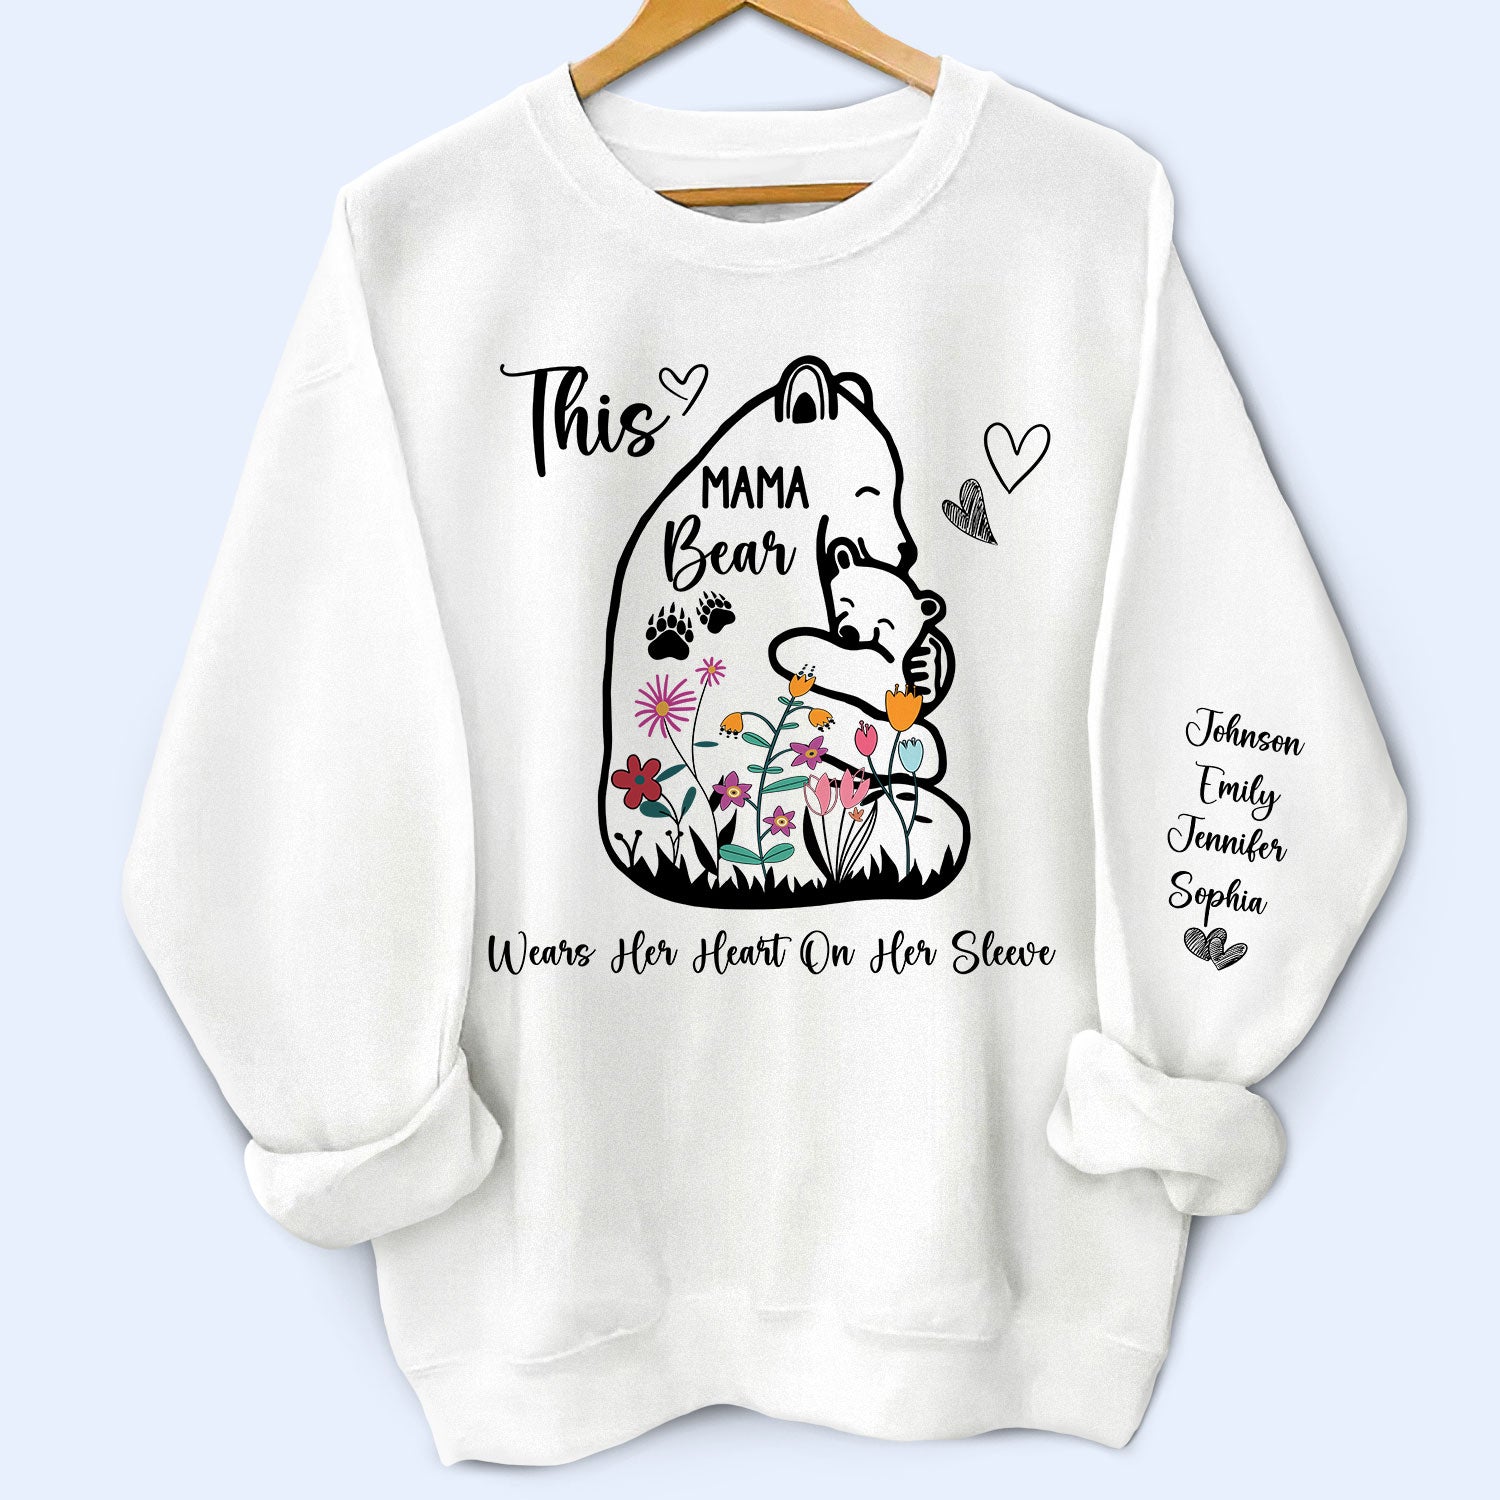 Floral Mama Bear - Birthday, Loving Gift For Mom, Mother, Grandma, Grandmother - Personalized Unisex Sweatshirt With Design On Sleeve